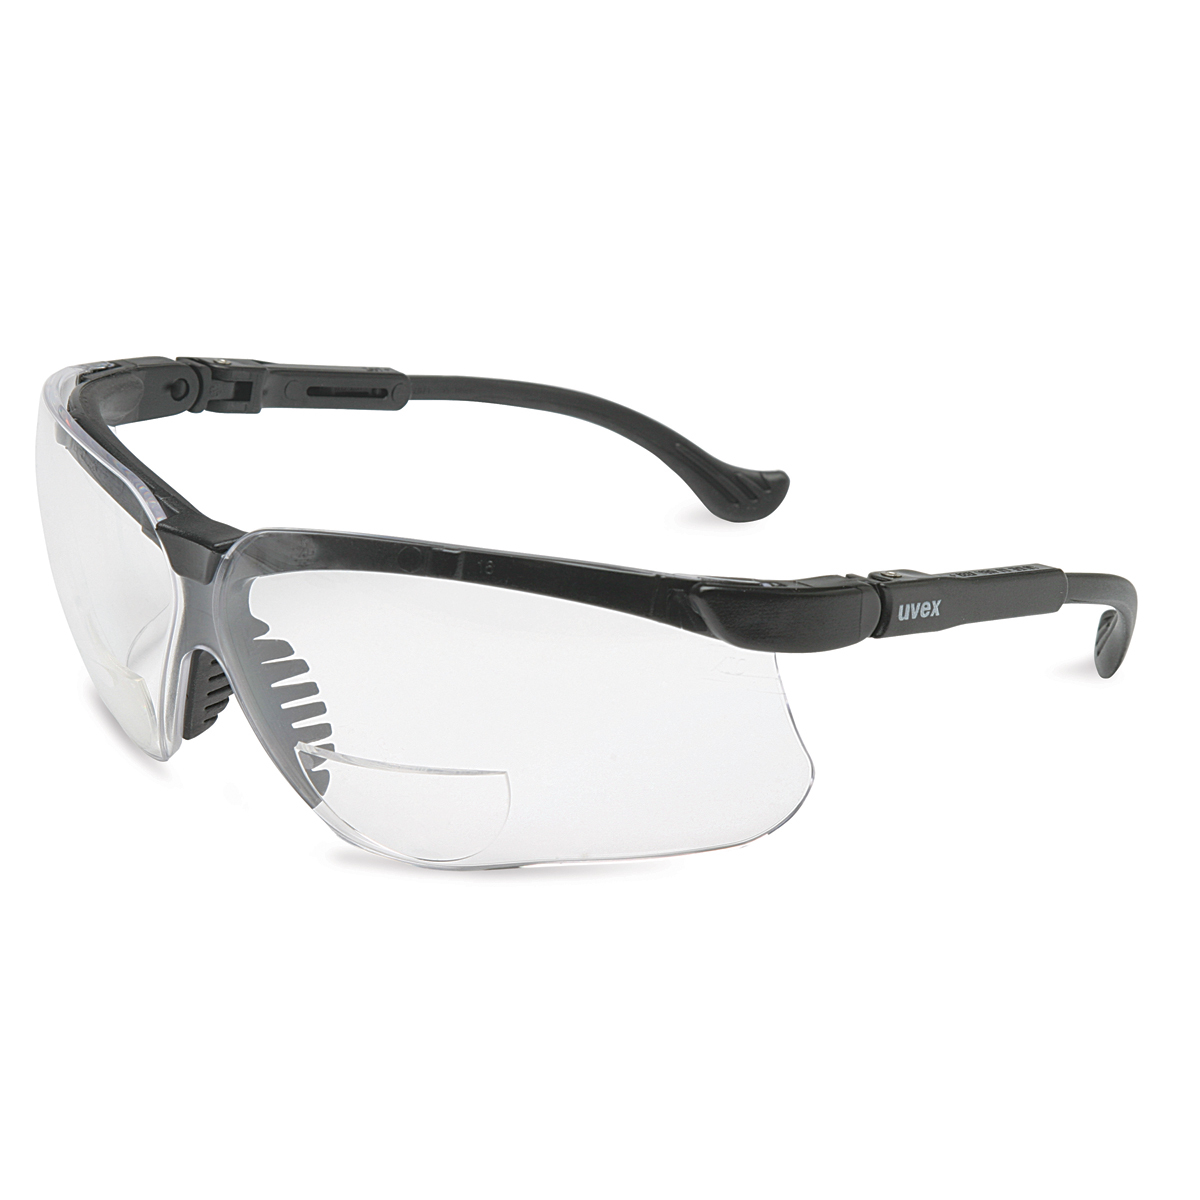 Honeywell Uvex Genesis® 2.5 Diopter Black Safety Glasses With Clear Anti-Scratch/Hard Coat Lens (Availability restrictions apply